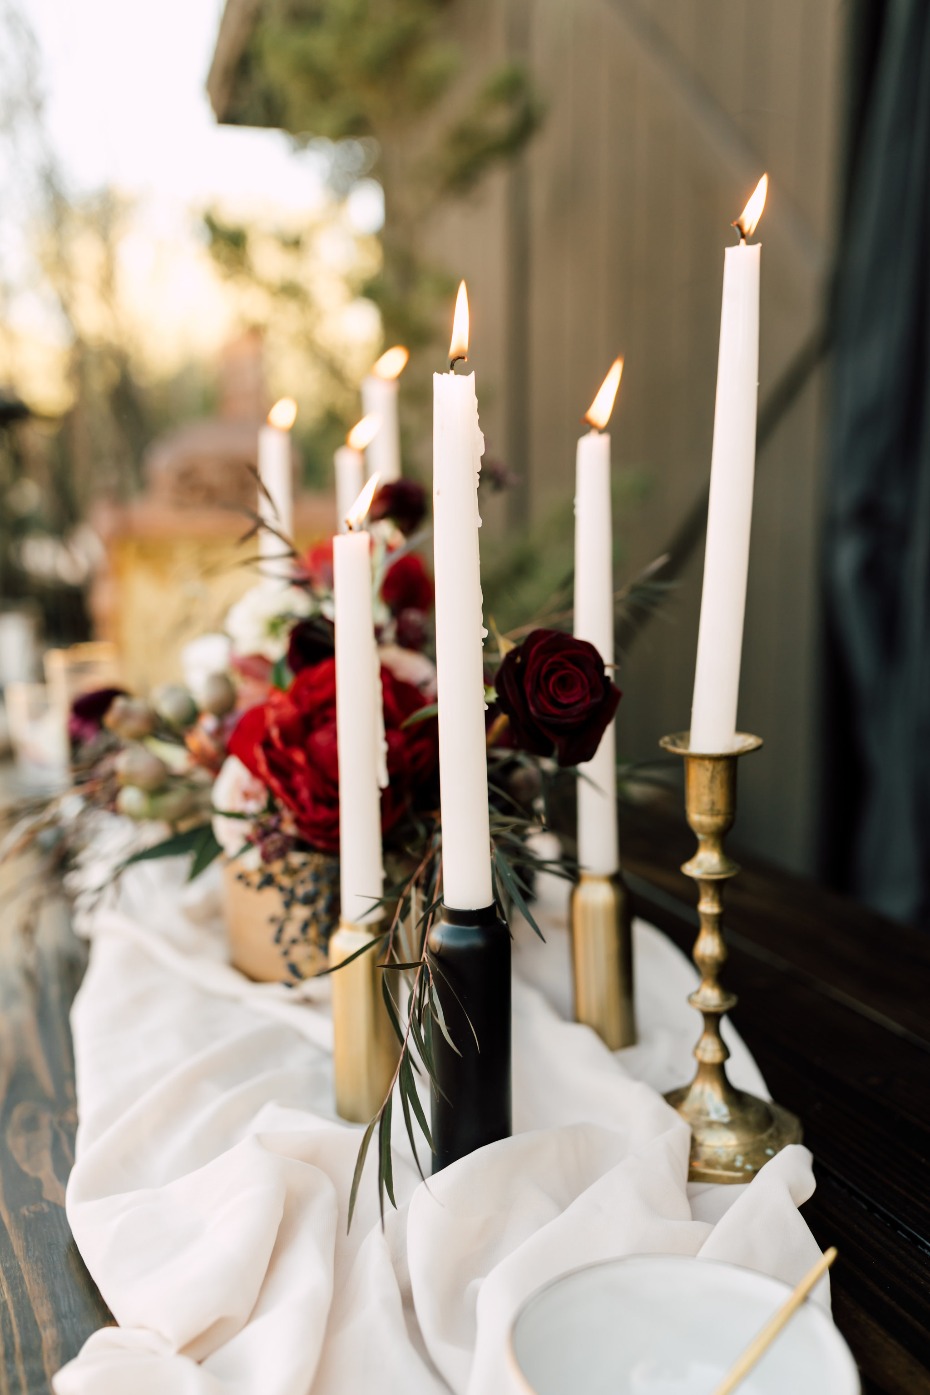 Tapered candles are a table must